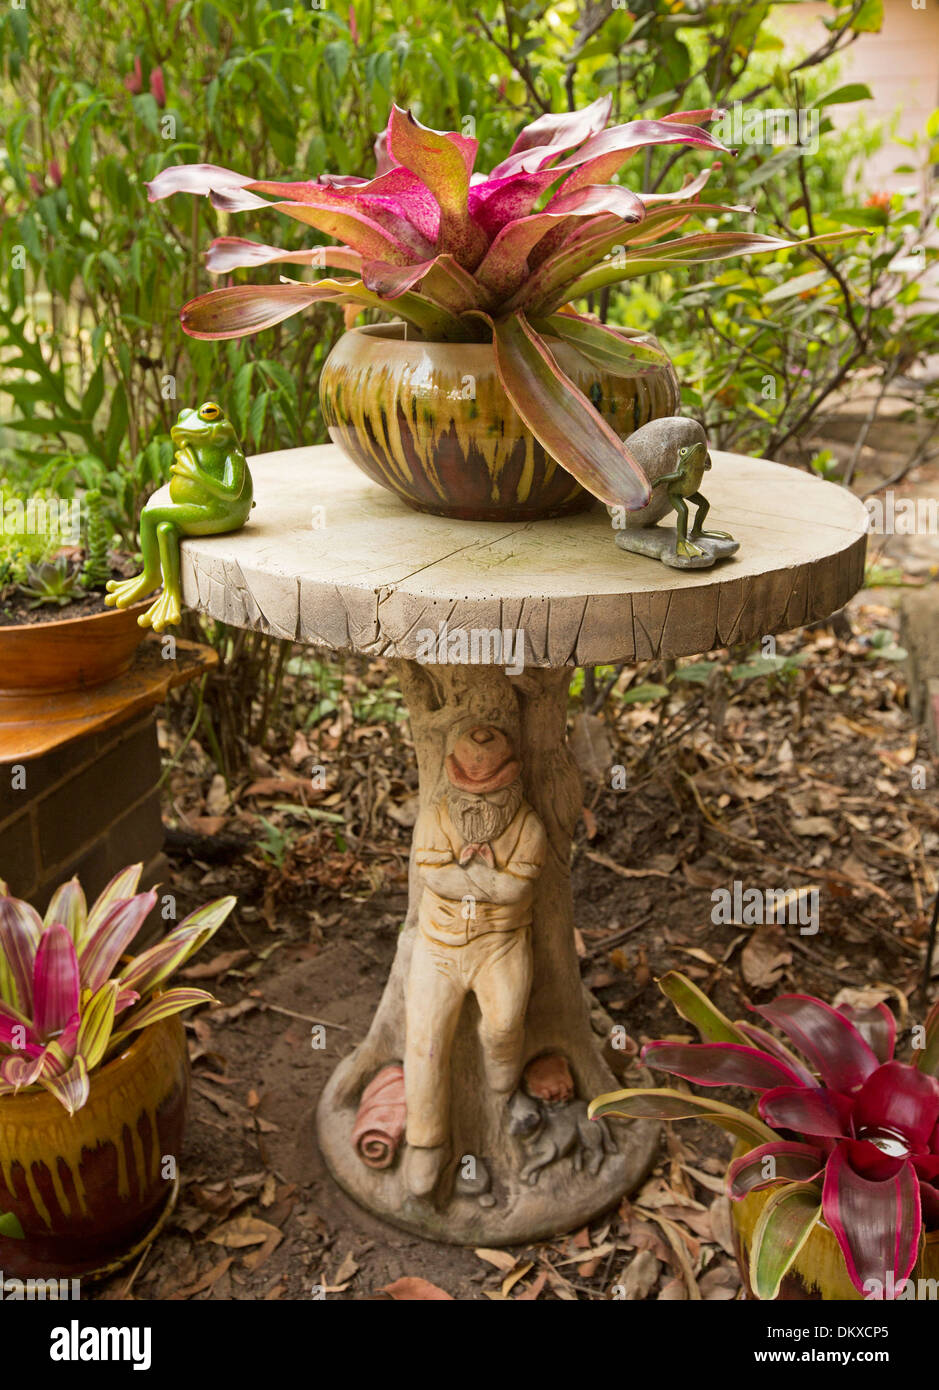 Ornate unusual concrete garden table with colourful bromeliads in decorative containers and frog sitting on edge Stock Photo